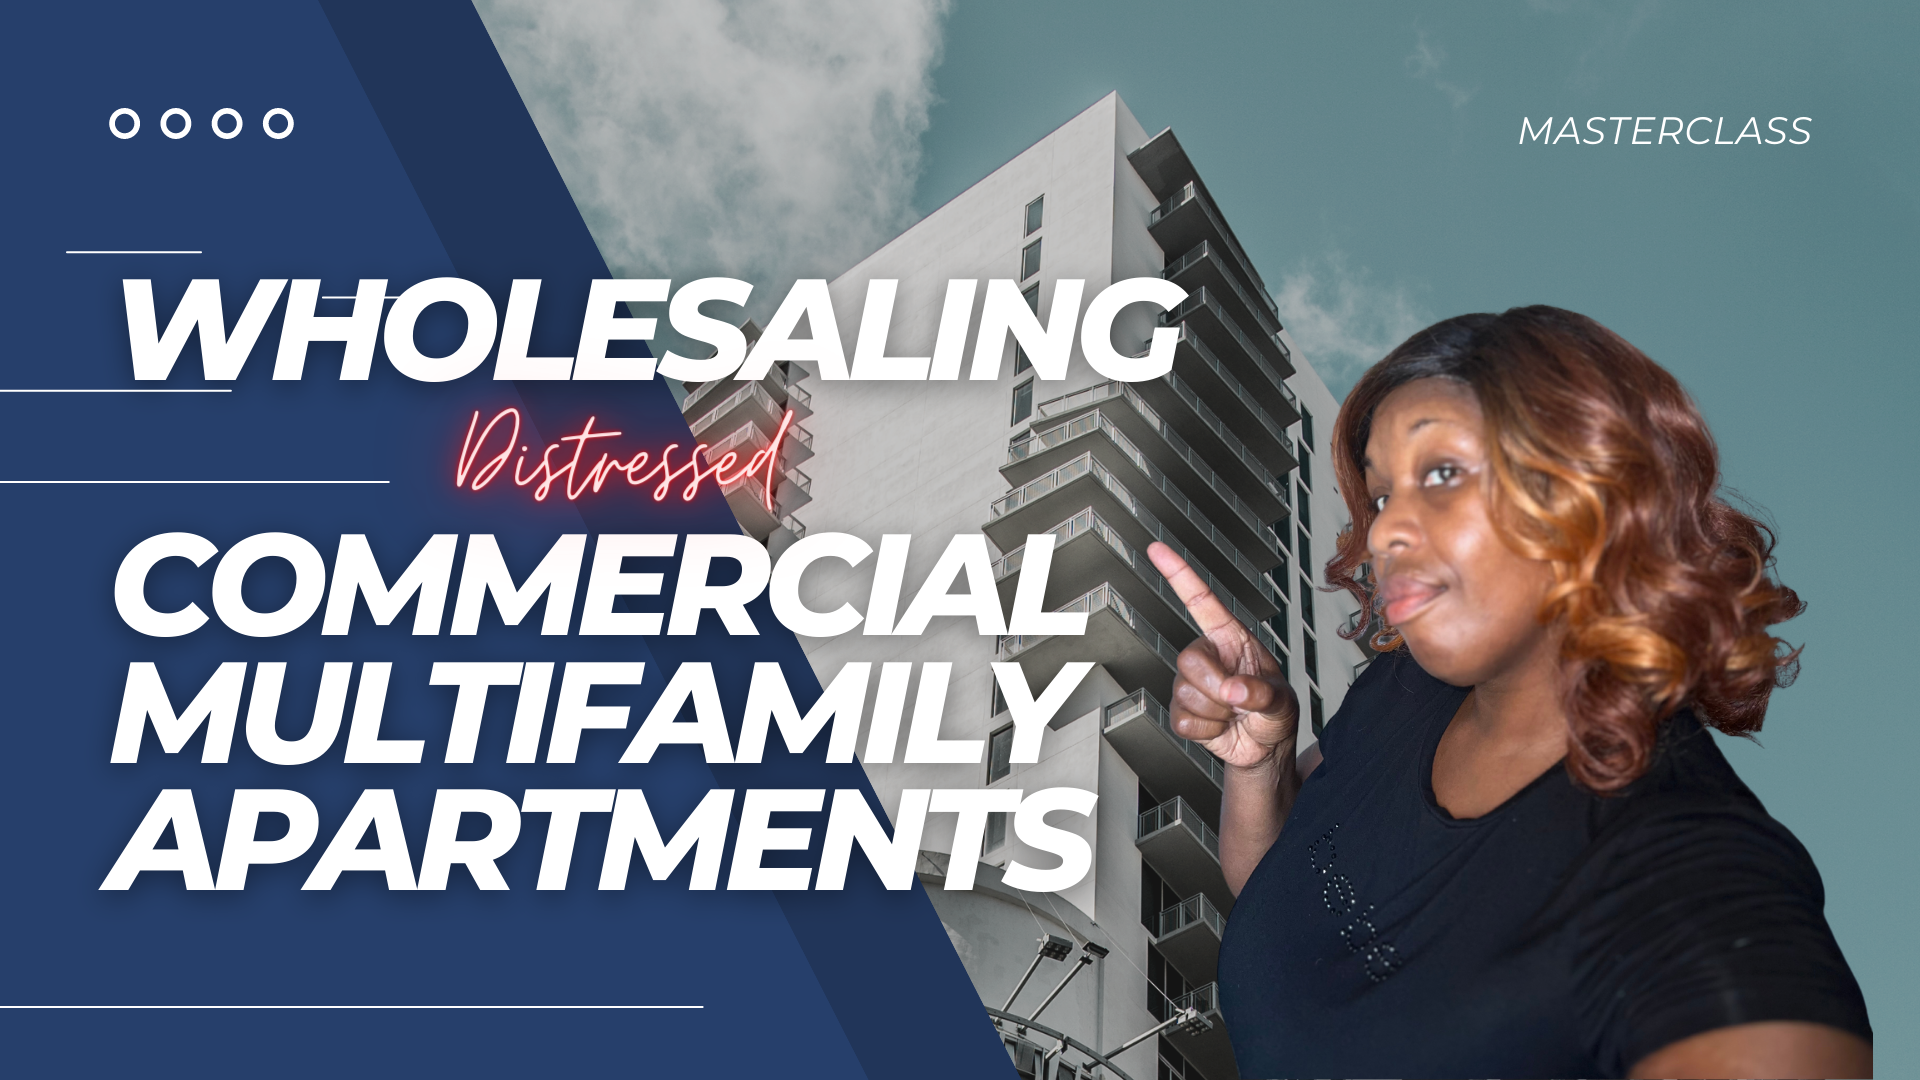 Whilesaling Distressed commercial multifamily apartments by tene williams